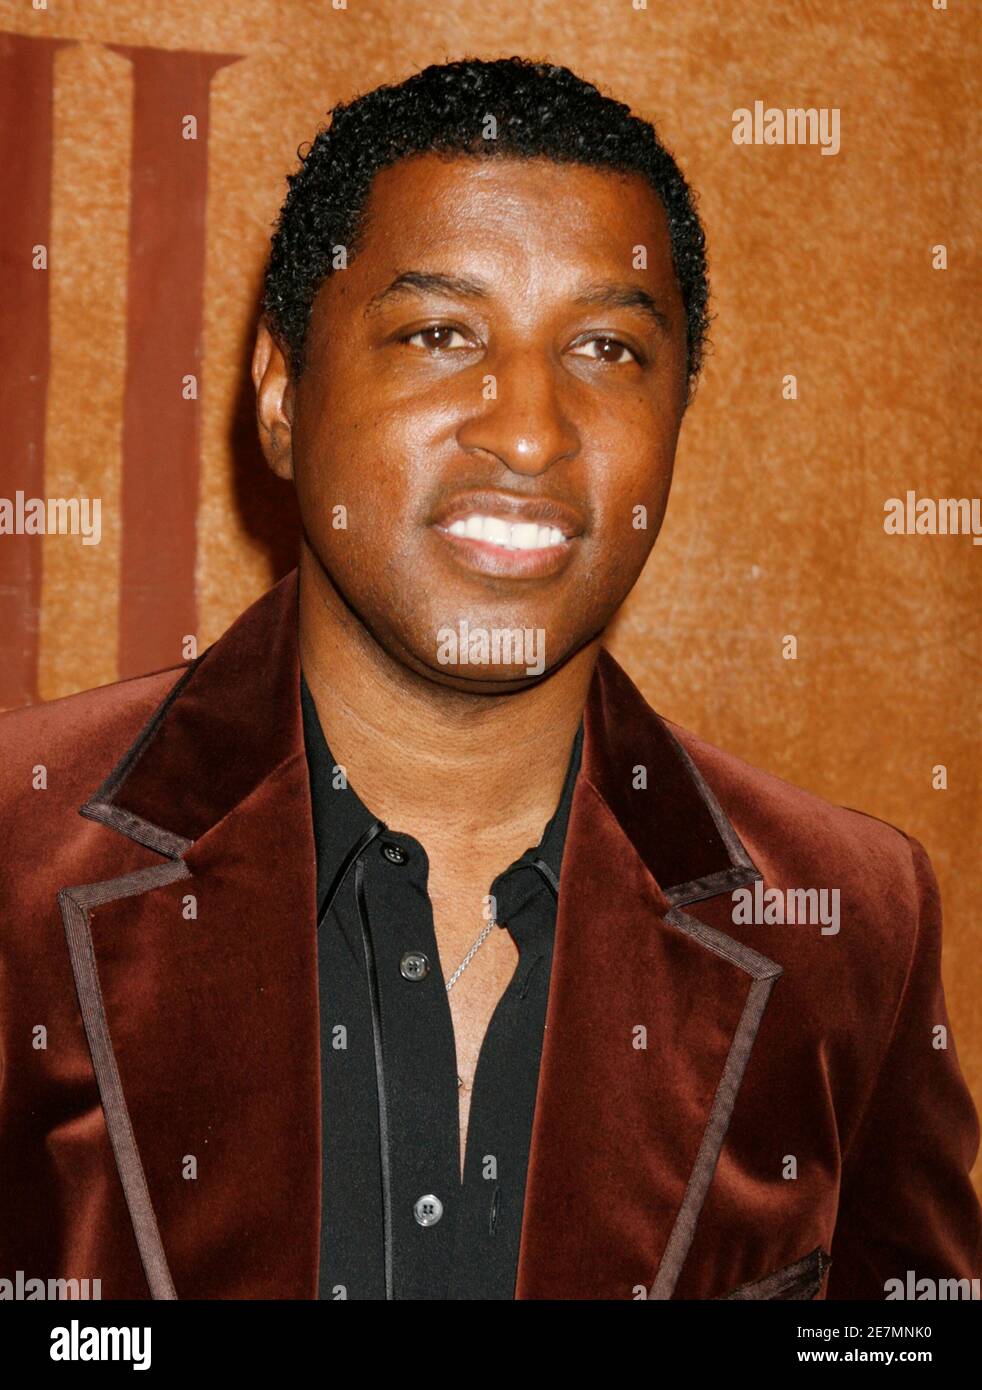 Music producer Kenneth 'Babyface' Edmonds poses at the Broadcast Music Inc. (BMI) 56th Annual Pop Awards in Beverly Hills, California May 20, 2008    REUTERS/Fred Prouser  (UNITED STATES) Stock Photo